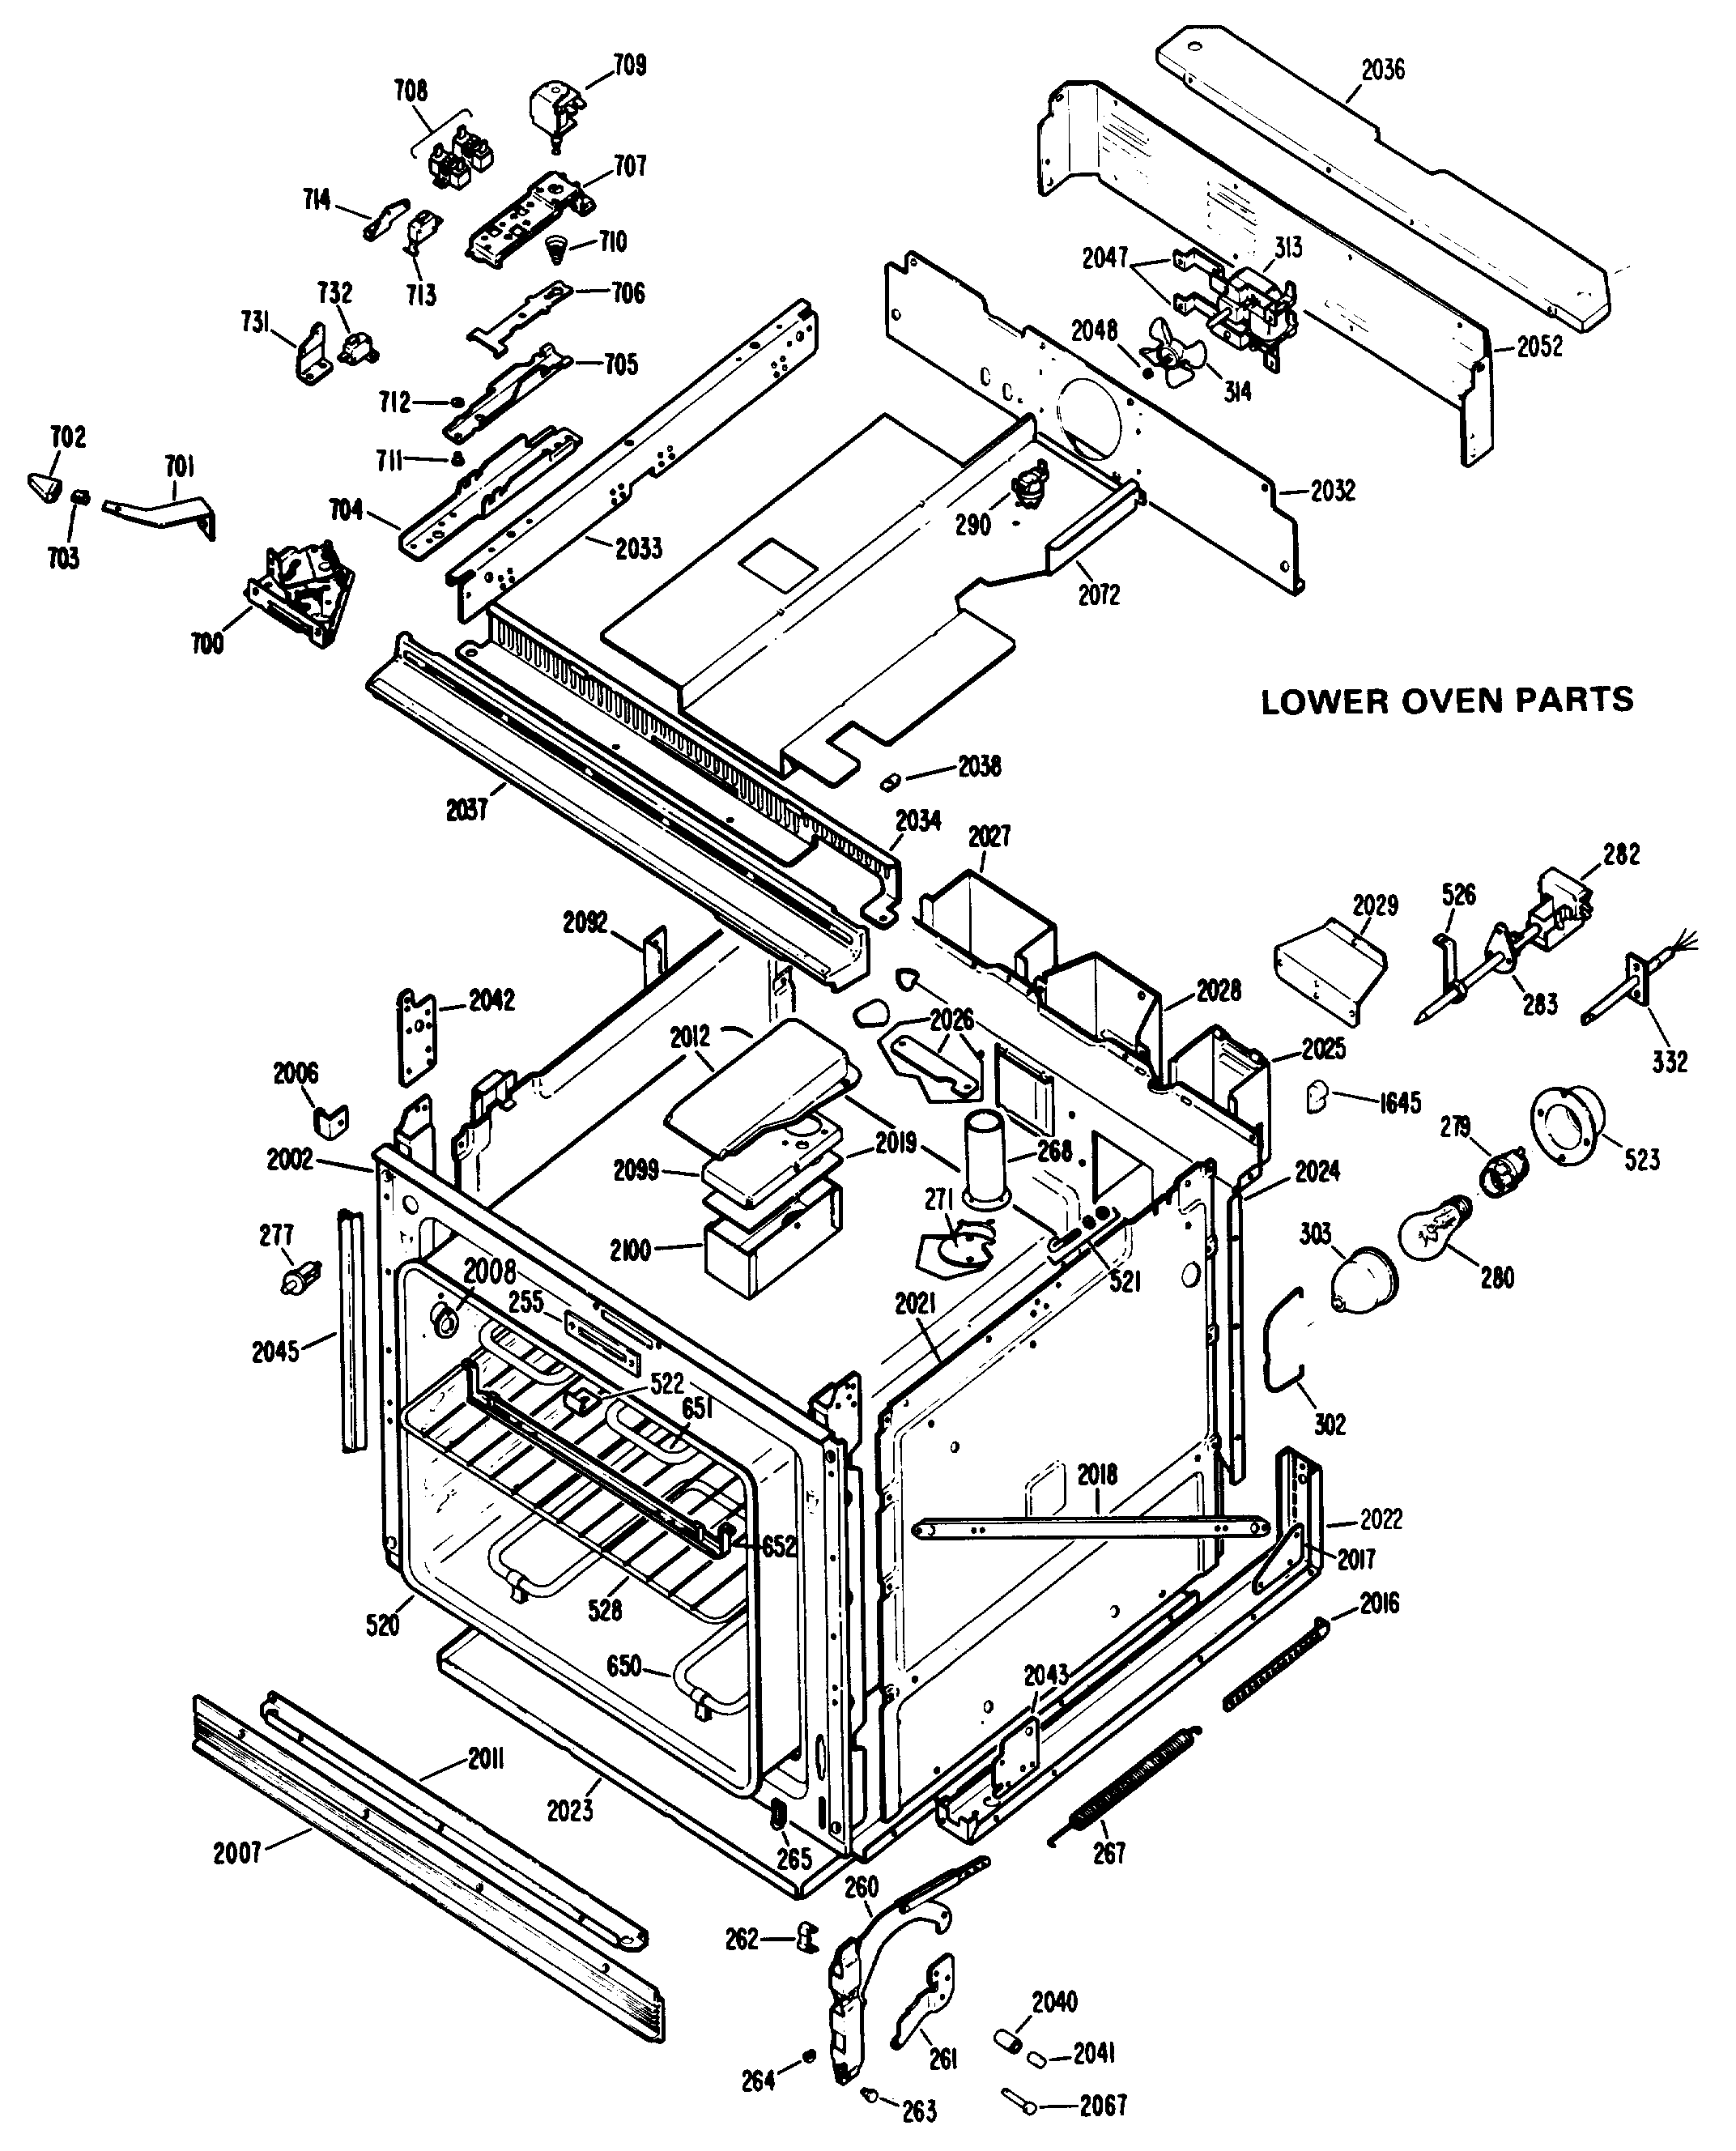 LOWER OVEN PARTS